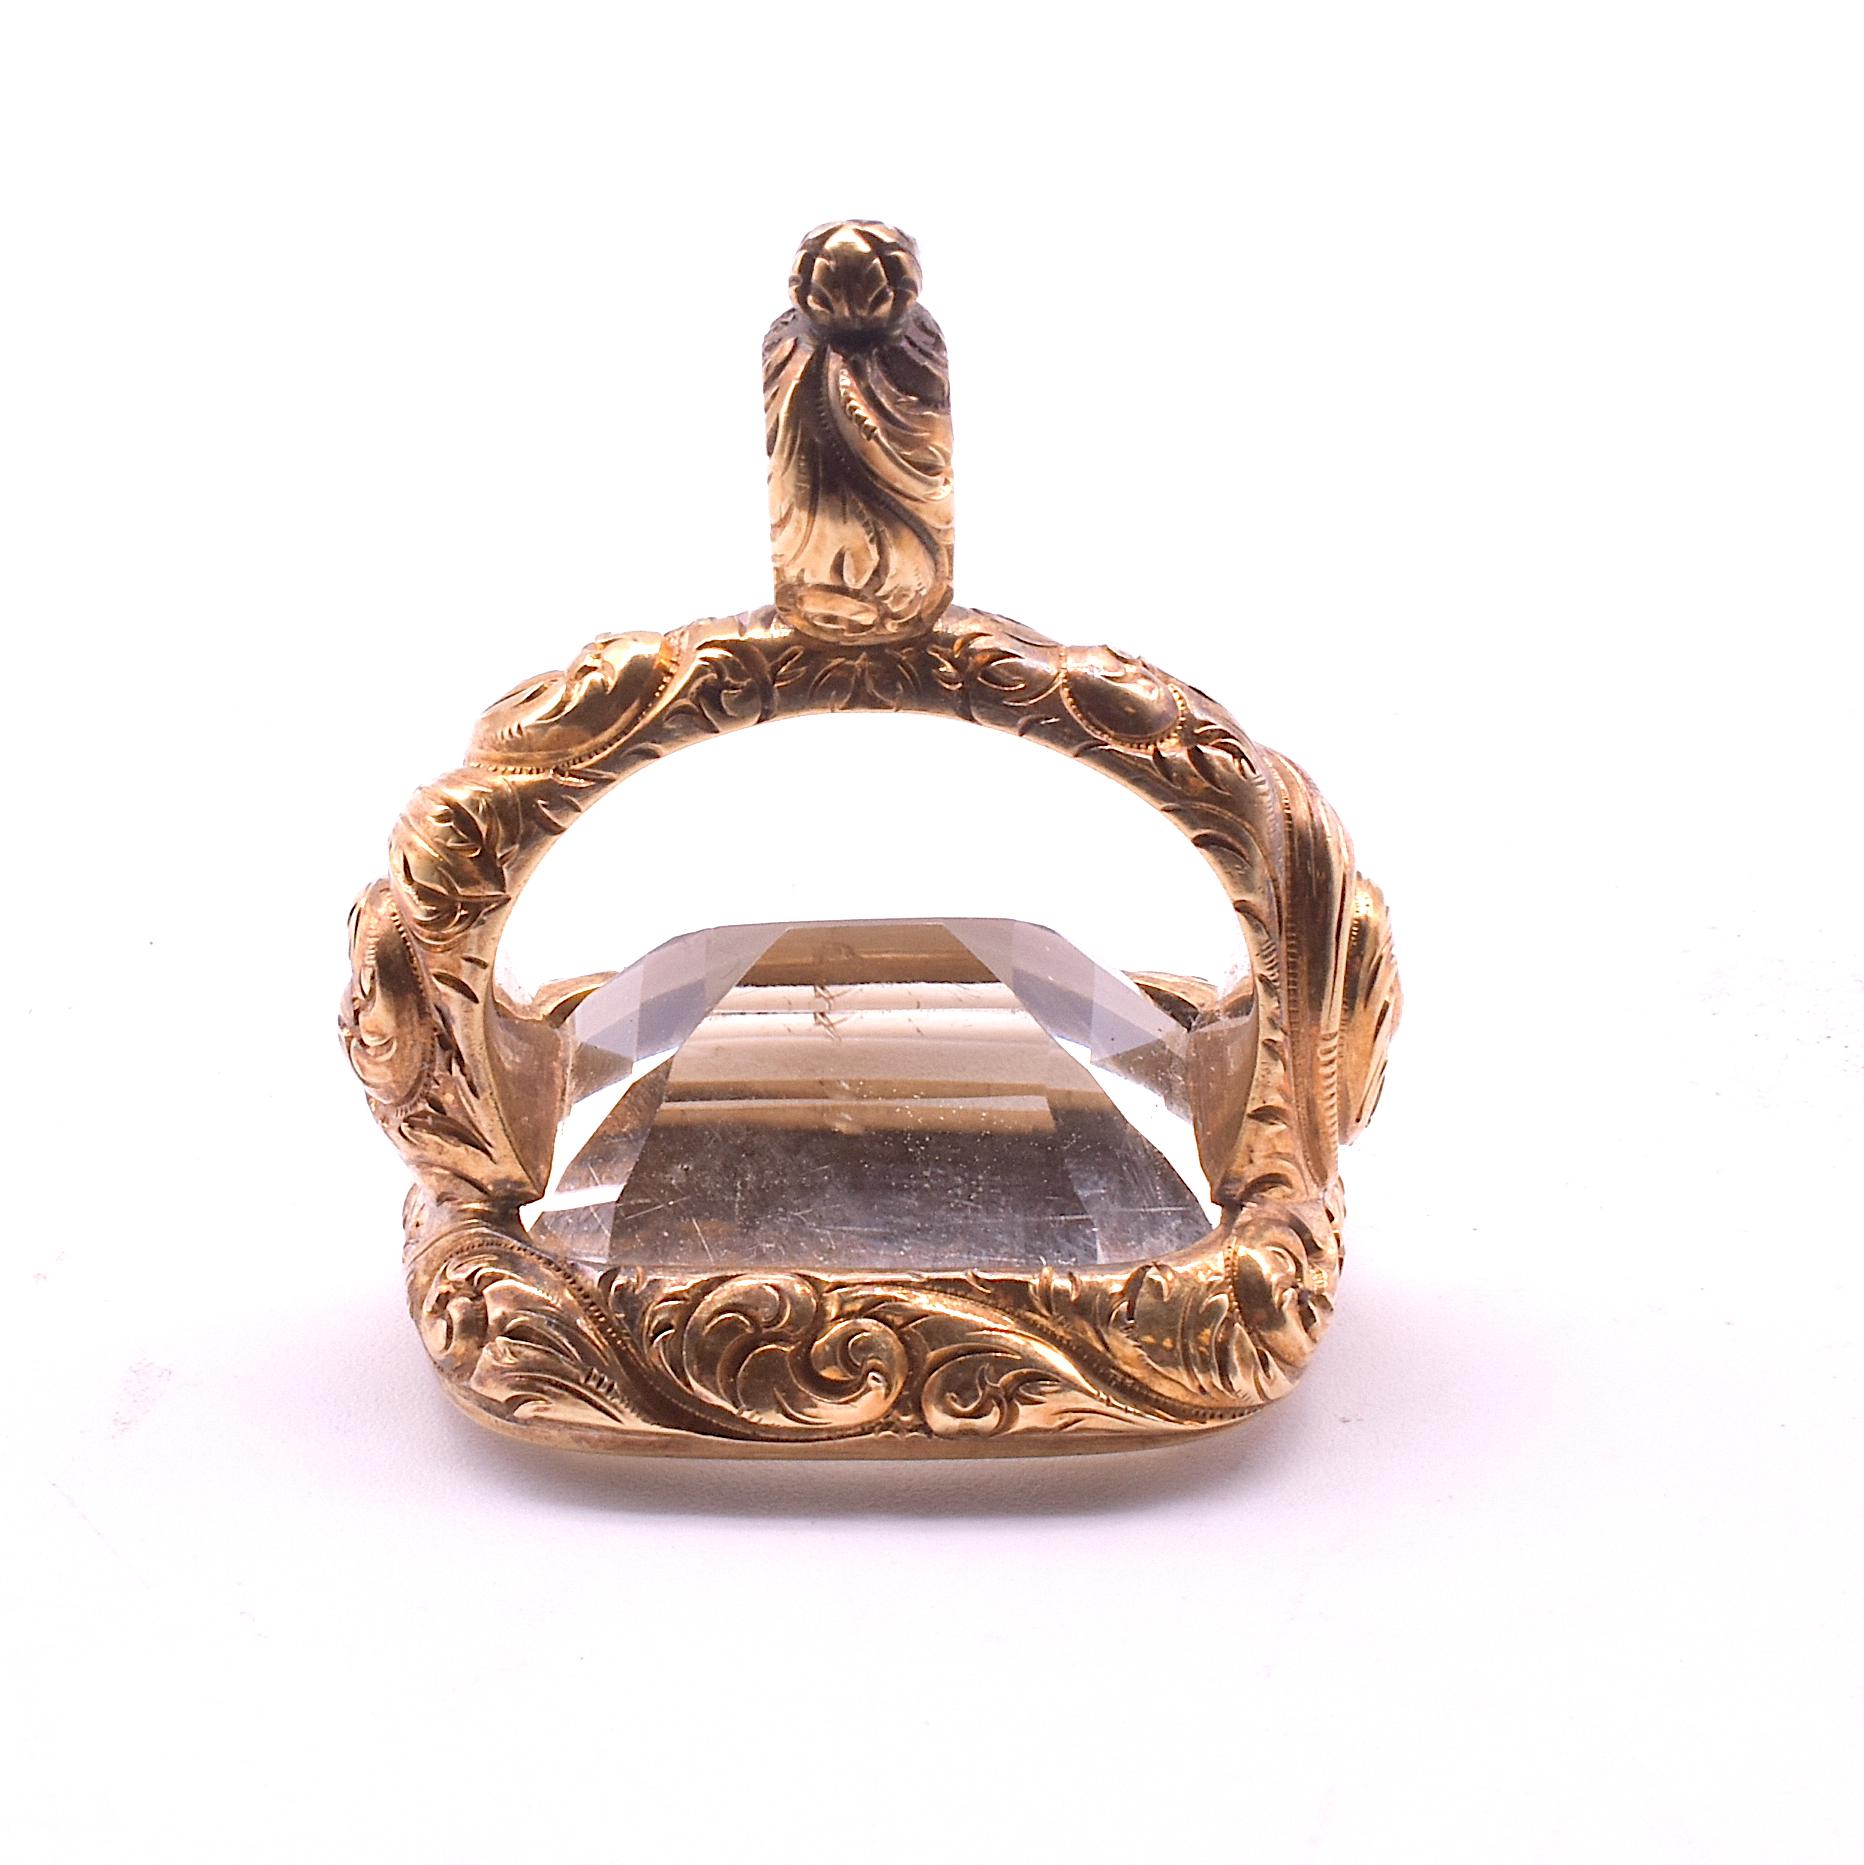 Georgian chased fob of 15K in the shape of a stirrup cup with a chased built in bale for hanging from your favorite pendant. The fob is filled with clear unadorned citrine. With the gold-work chased on every surface, this is a fob to behold. A nice